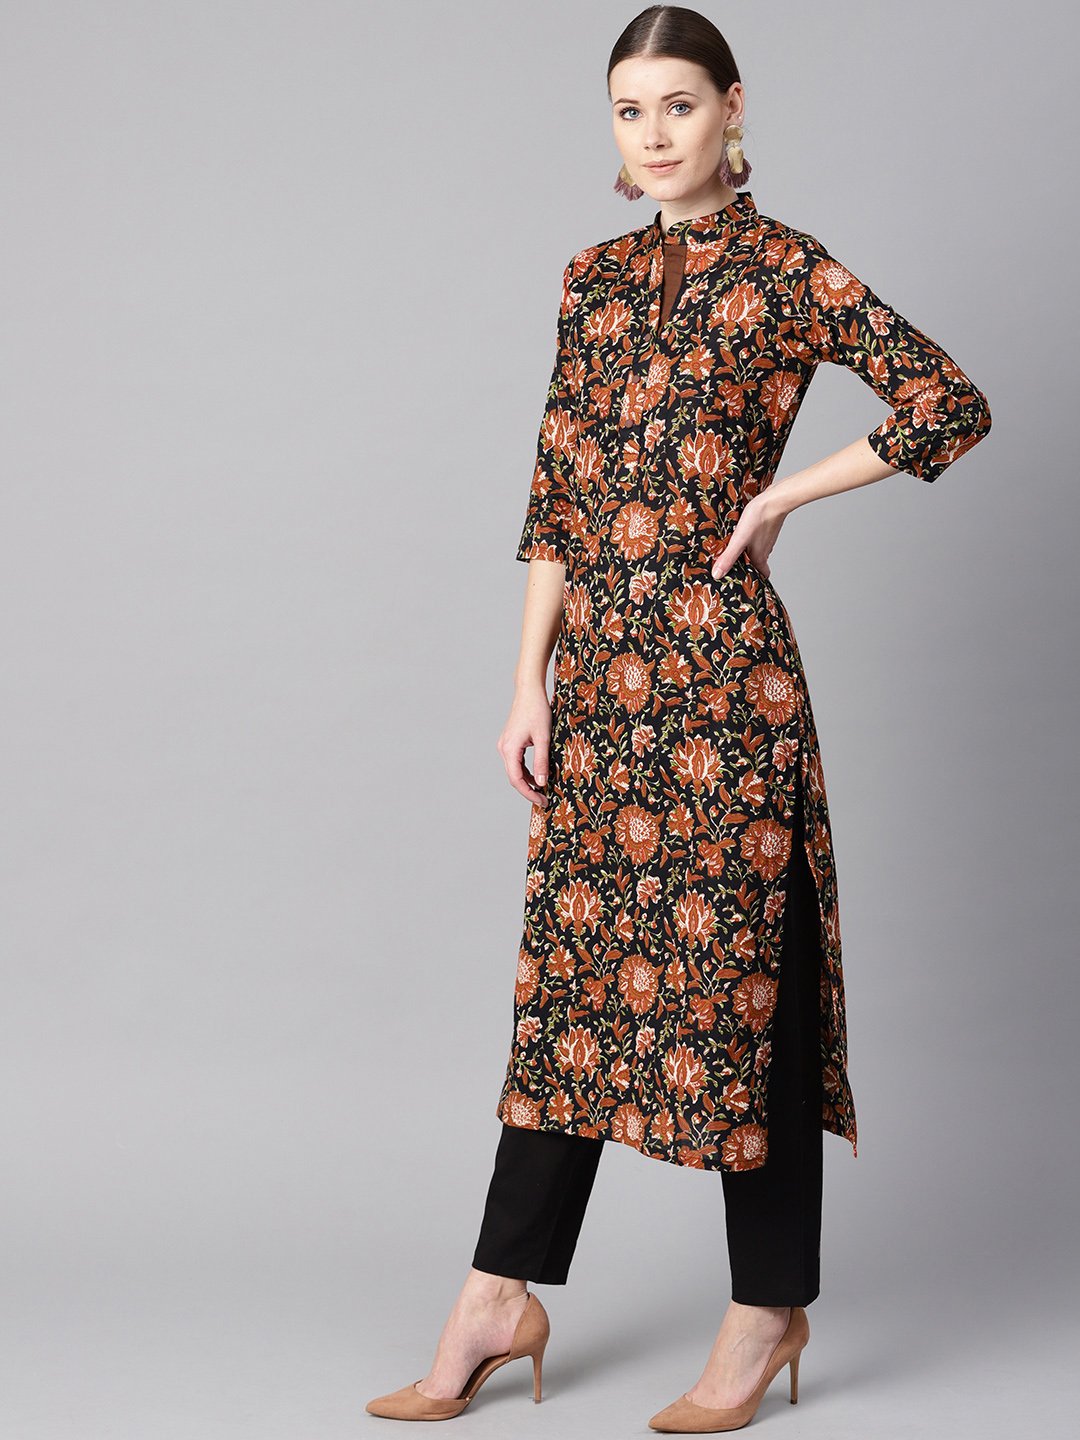 Women's Floral Printed 3/4Th Sleeve A-Line Kurta With Solid Black Pants - Nayo Clothing